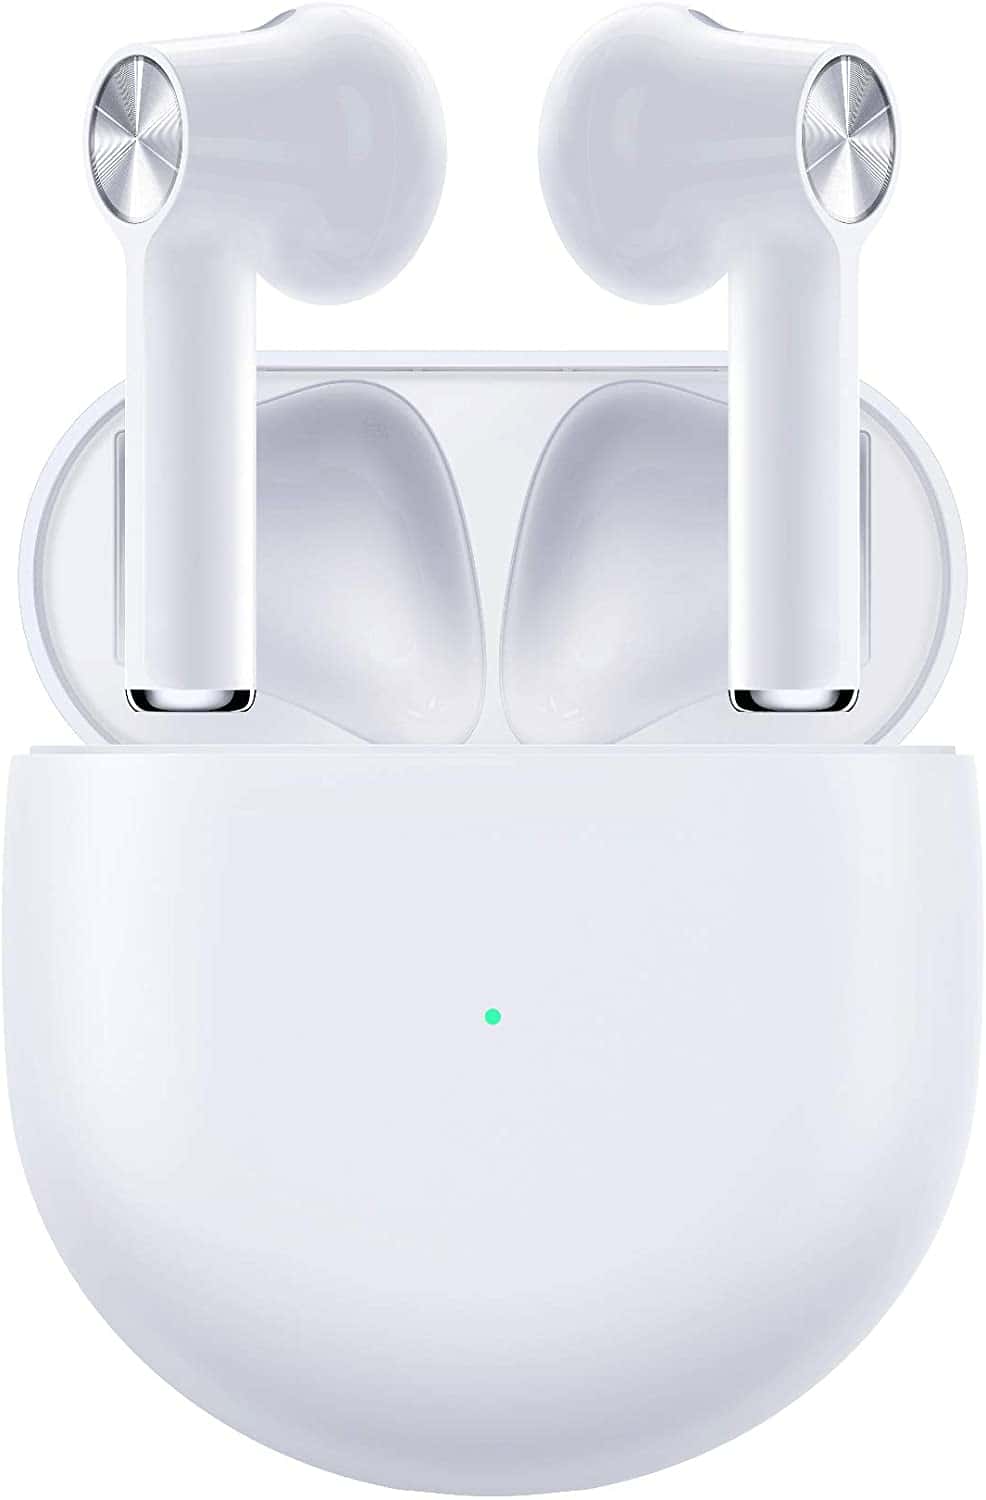 No accident: US Customs insist OnePlus Buds are indeed counterfeit Apple Airpods